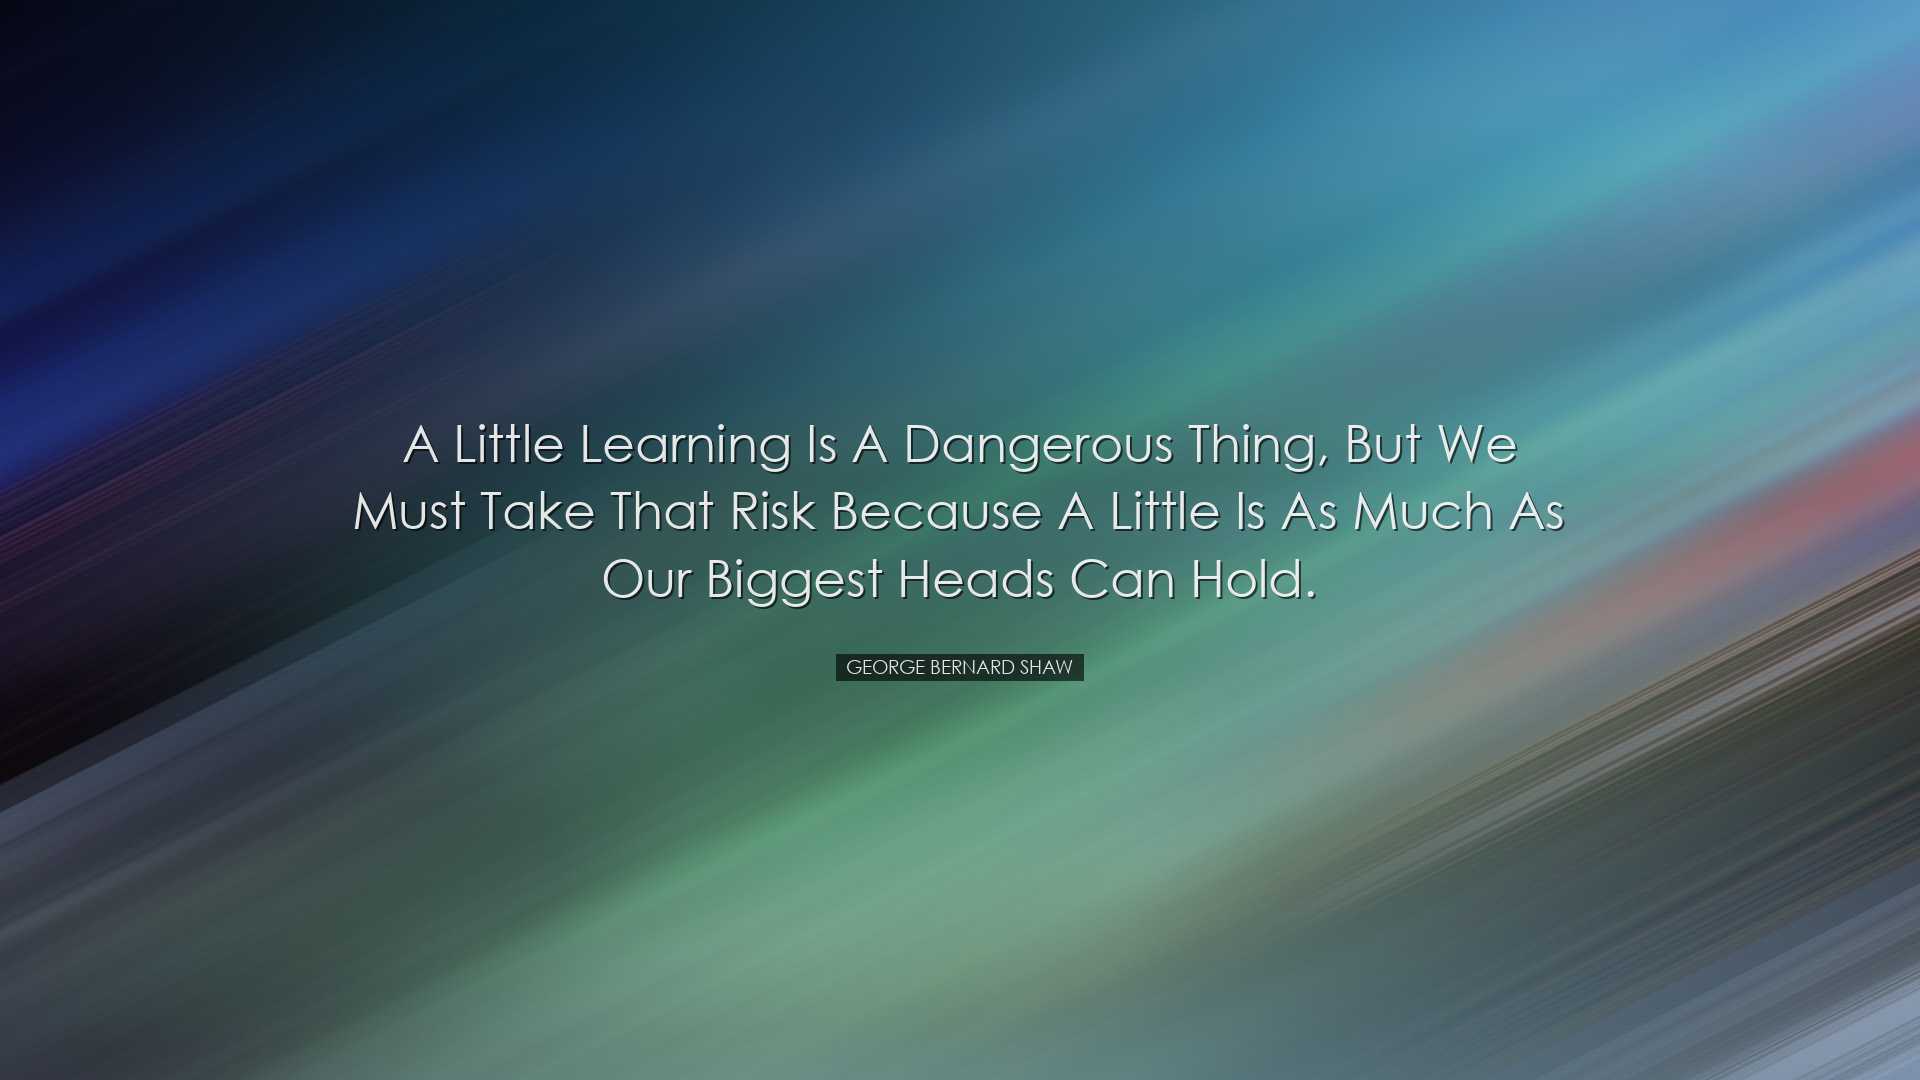 A little learning is a dangerous thing, but we must take that risk